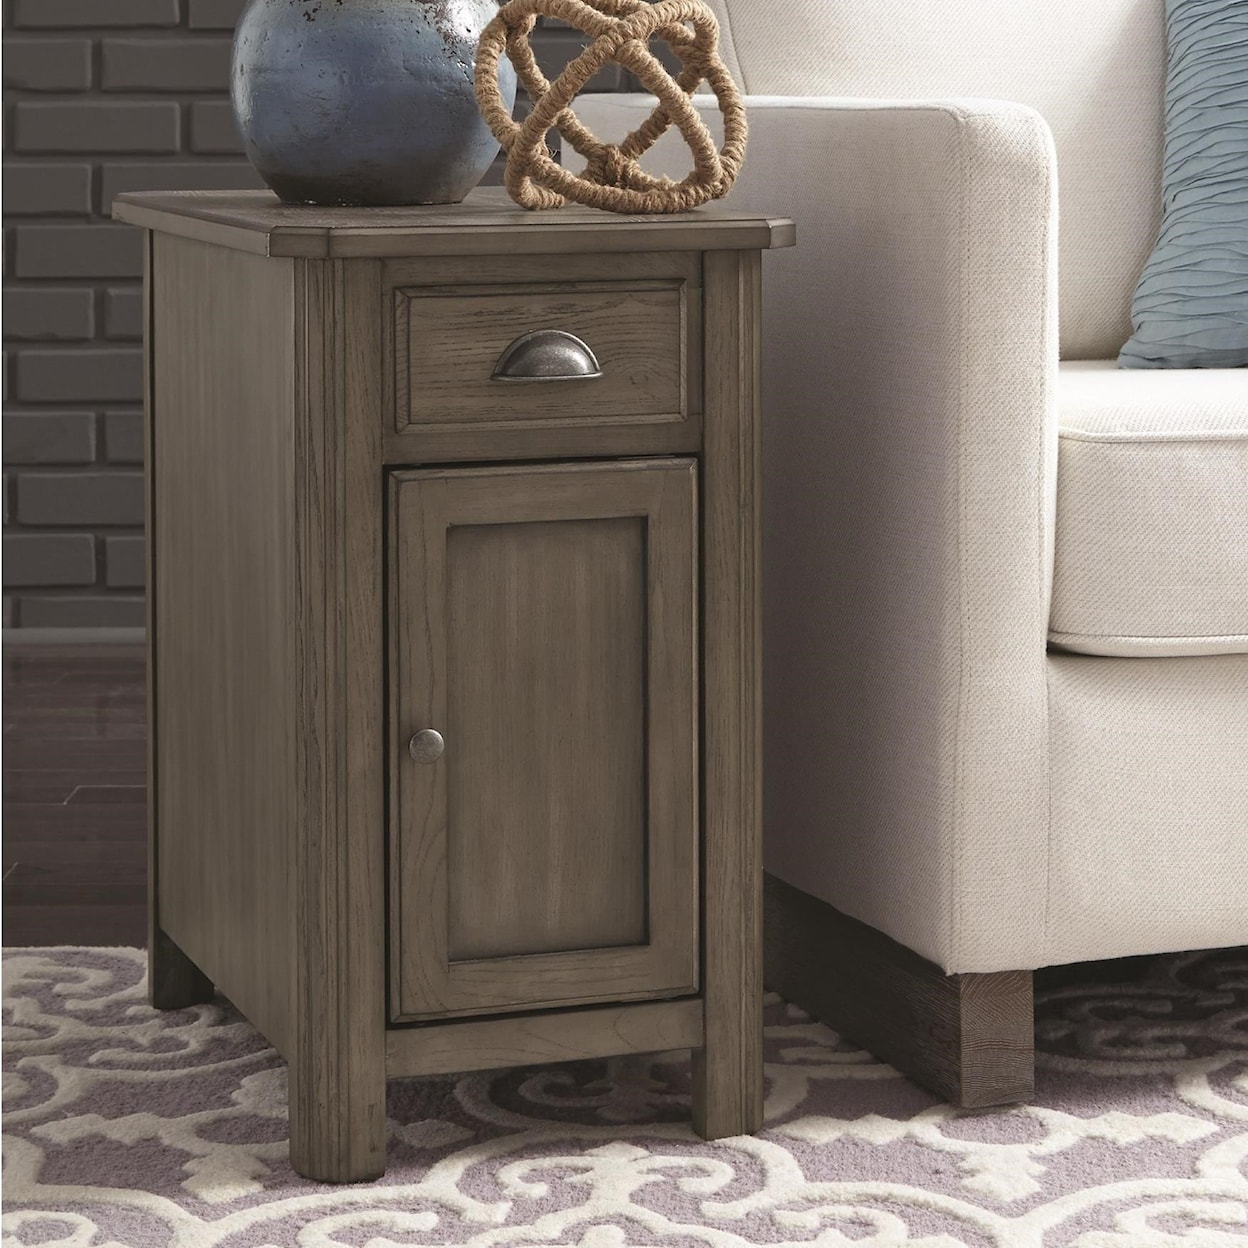 Null Furniture 2114 Chairside Cabinet Table